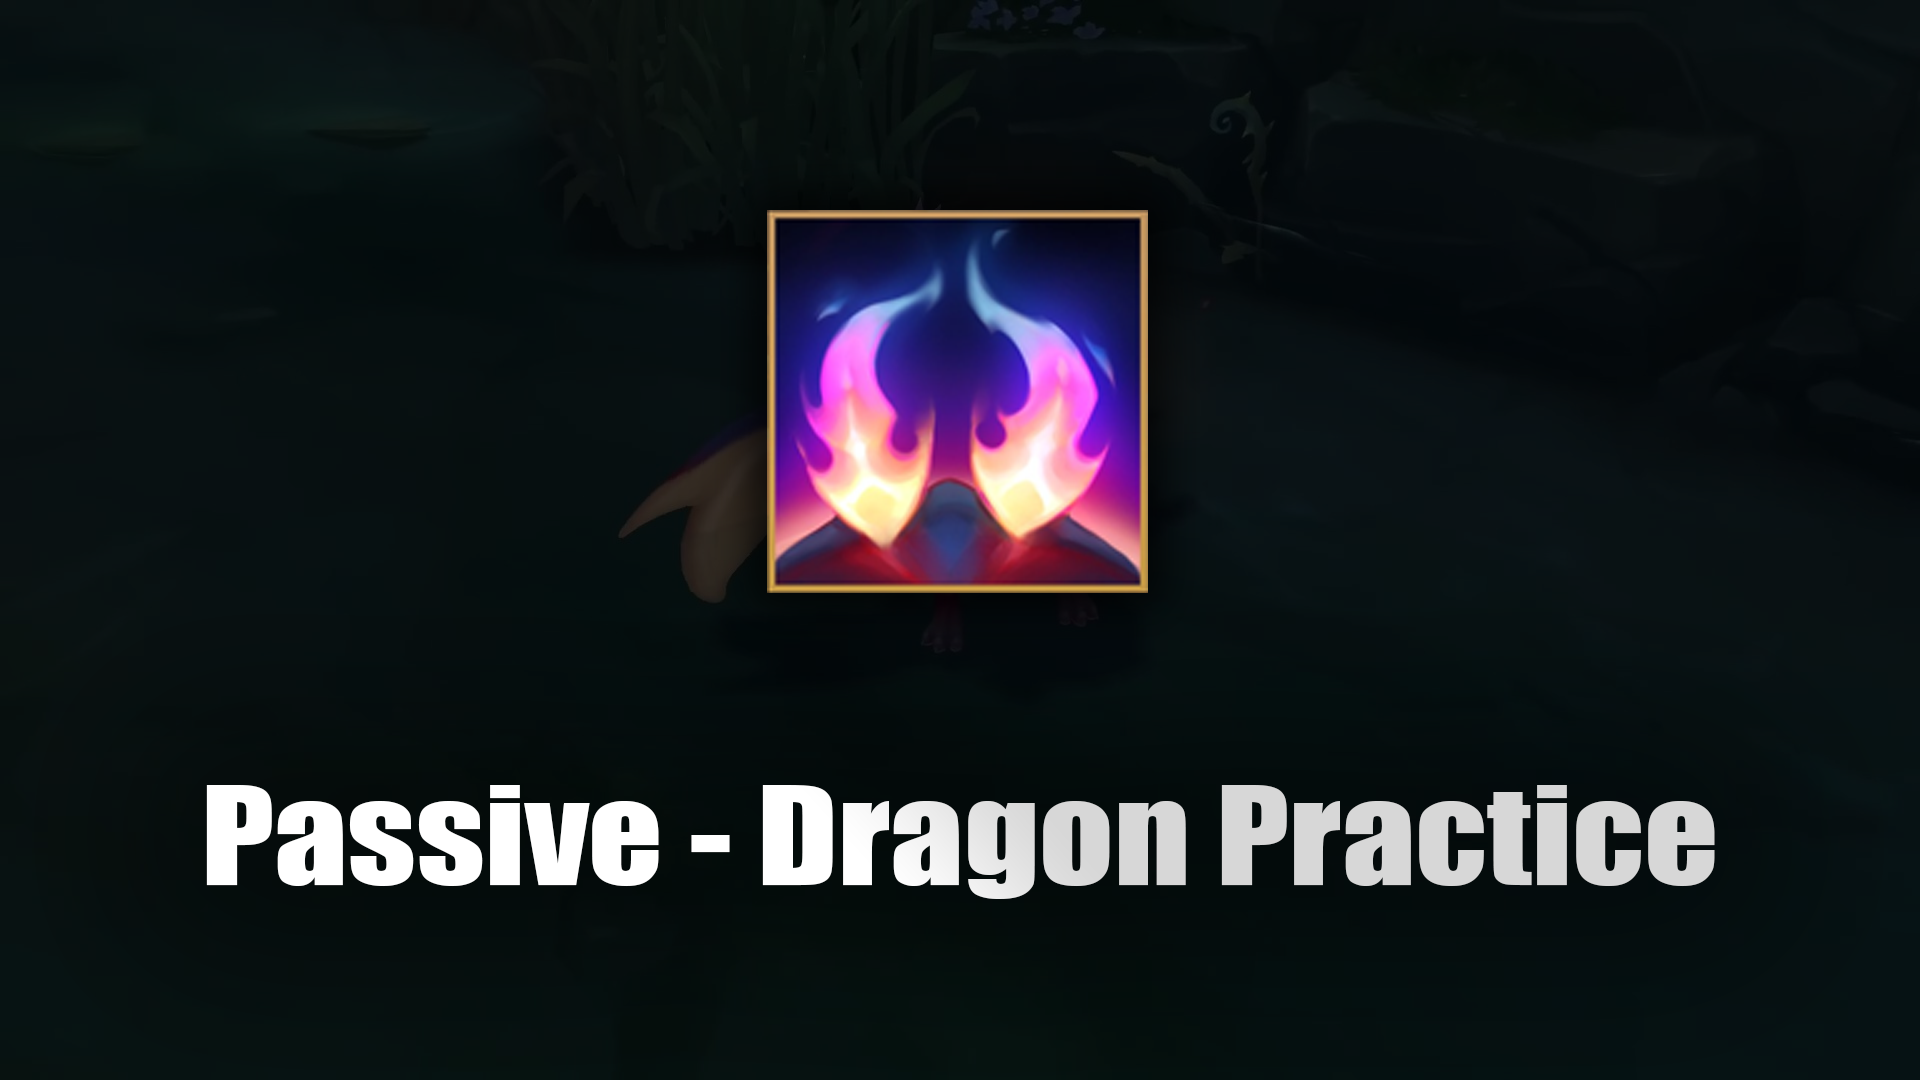 Smolder's innate ability, Dragon Practice, allows him to harness his draconic power through combat. Each time Smolder damages an enemy champion with one of his abilities or kills a minion or monster with his Q - Super Scorcher Breath, he gains a stack of Dragon Practice.